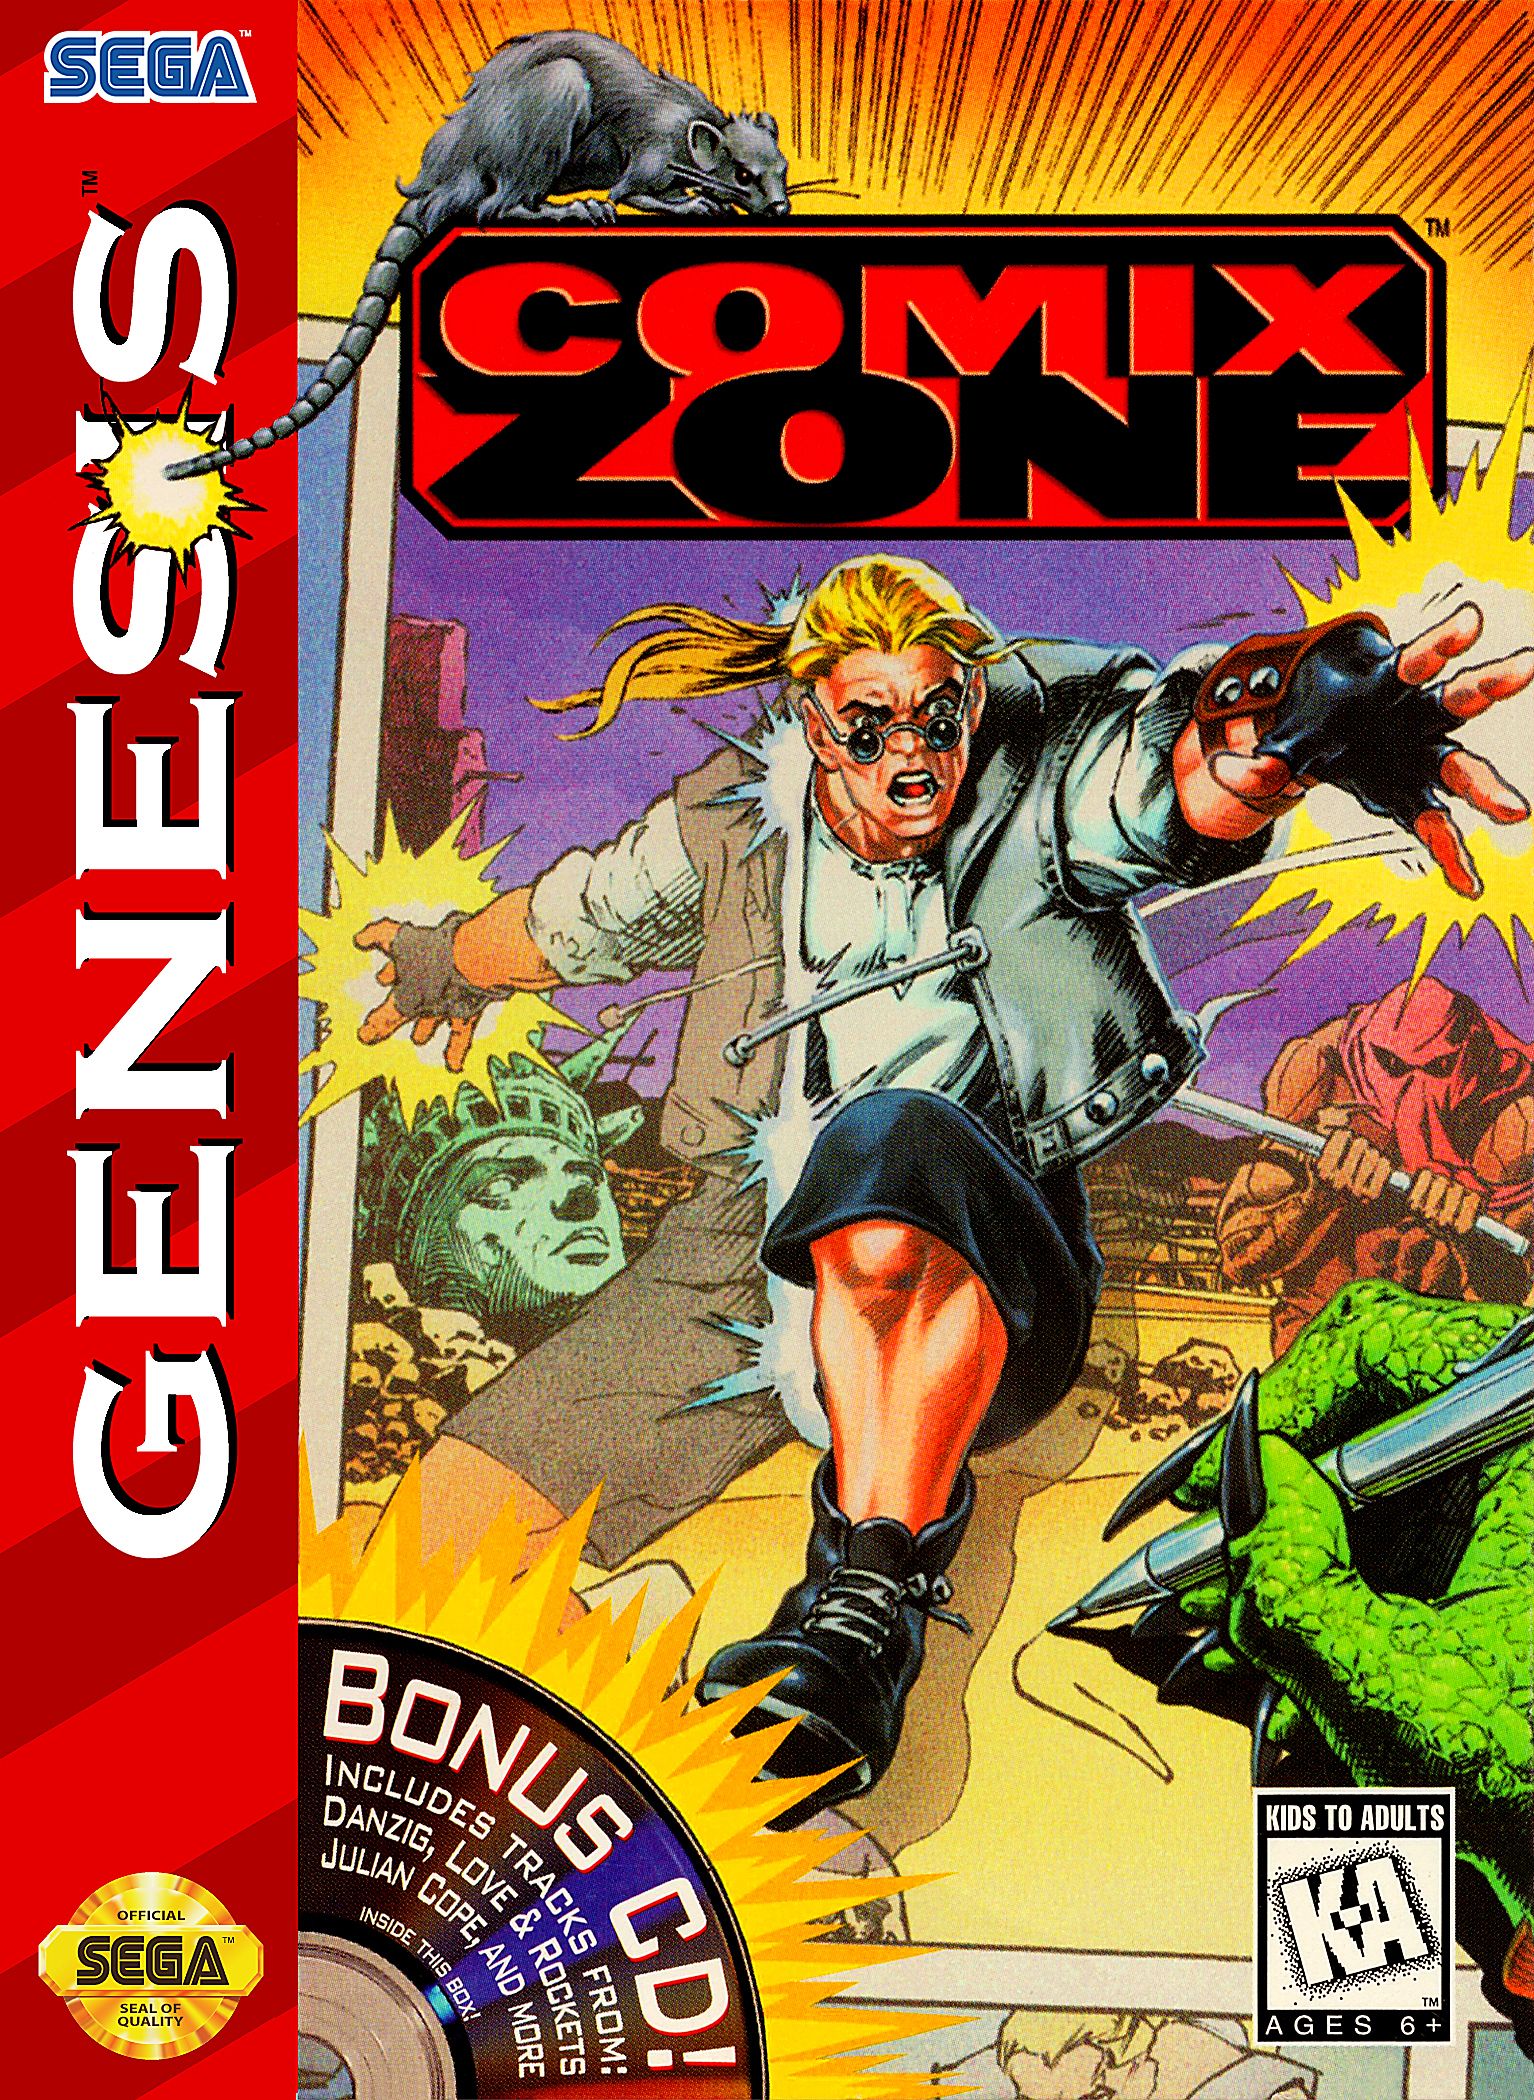 Comix Zone screenshots, image and picture